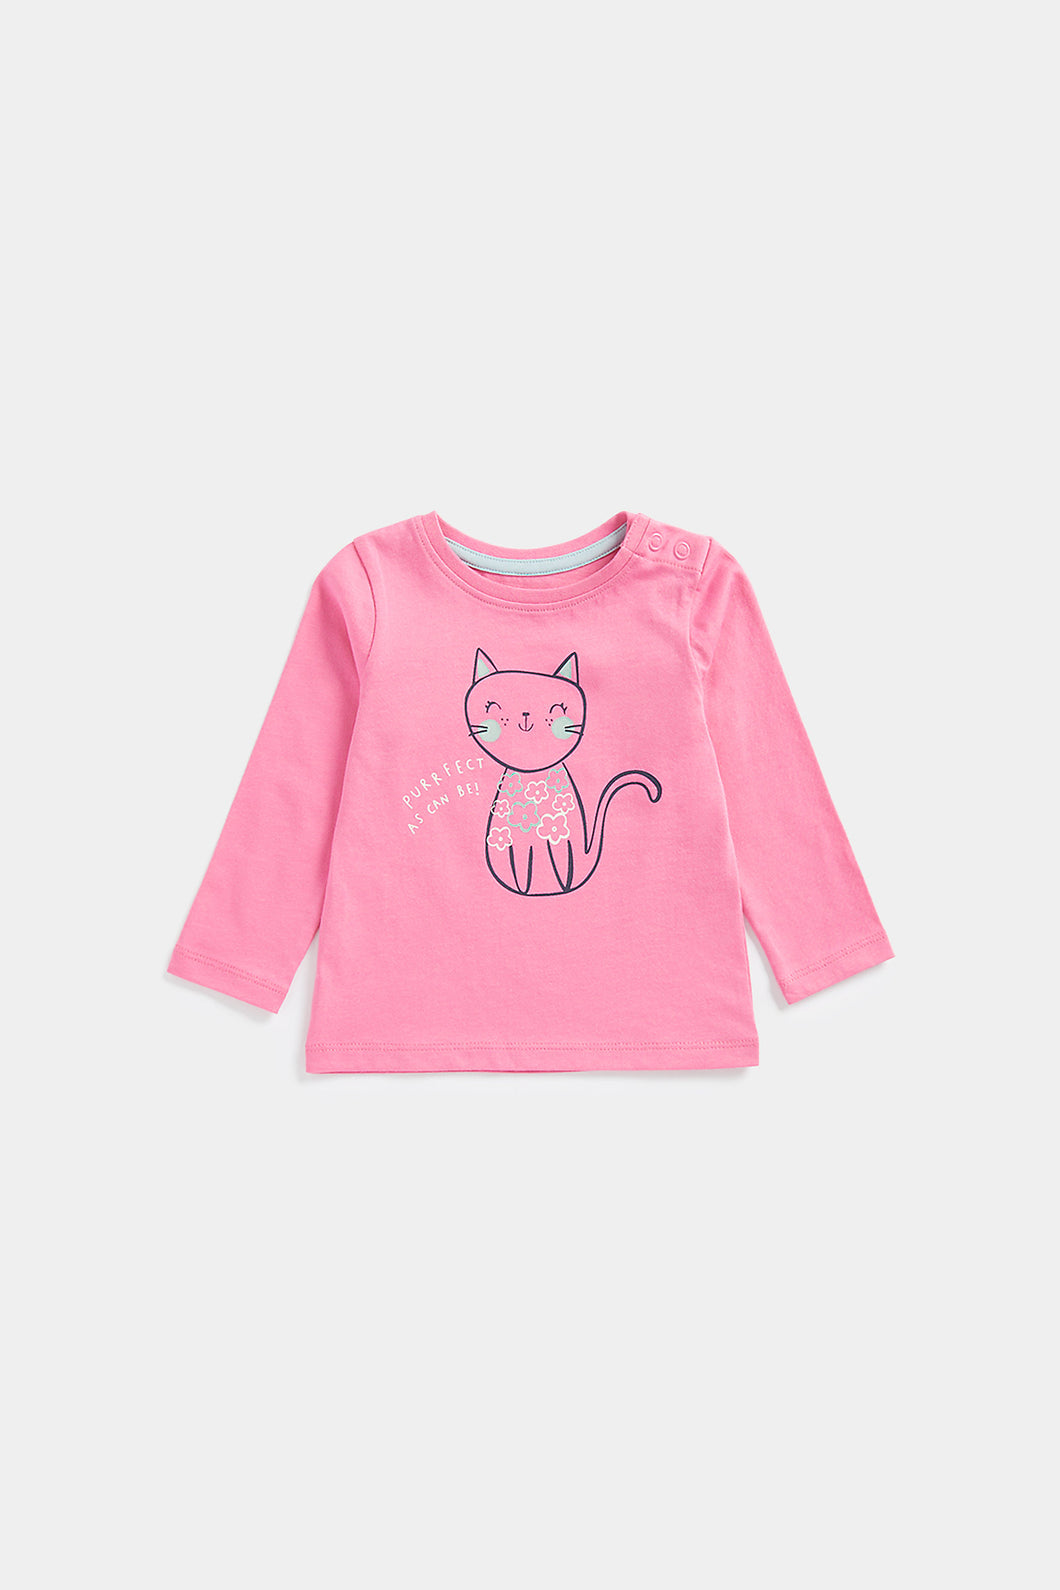 Mothercare Pink Cat Long-Sleeved T-Shirt